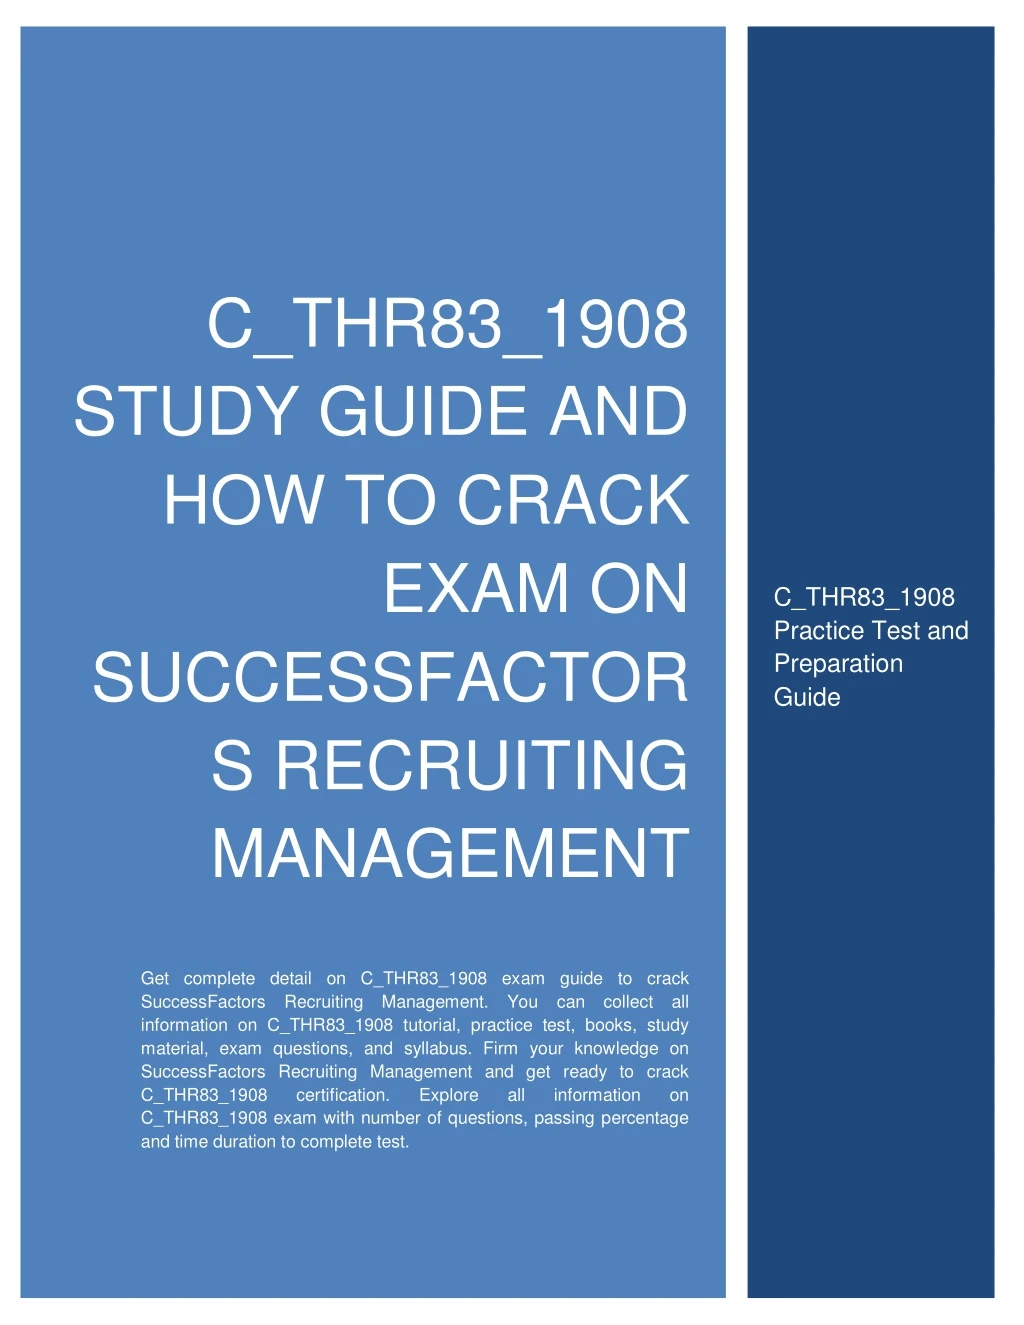 c thr83 1908 study guide and how to crack exam